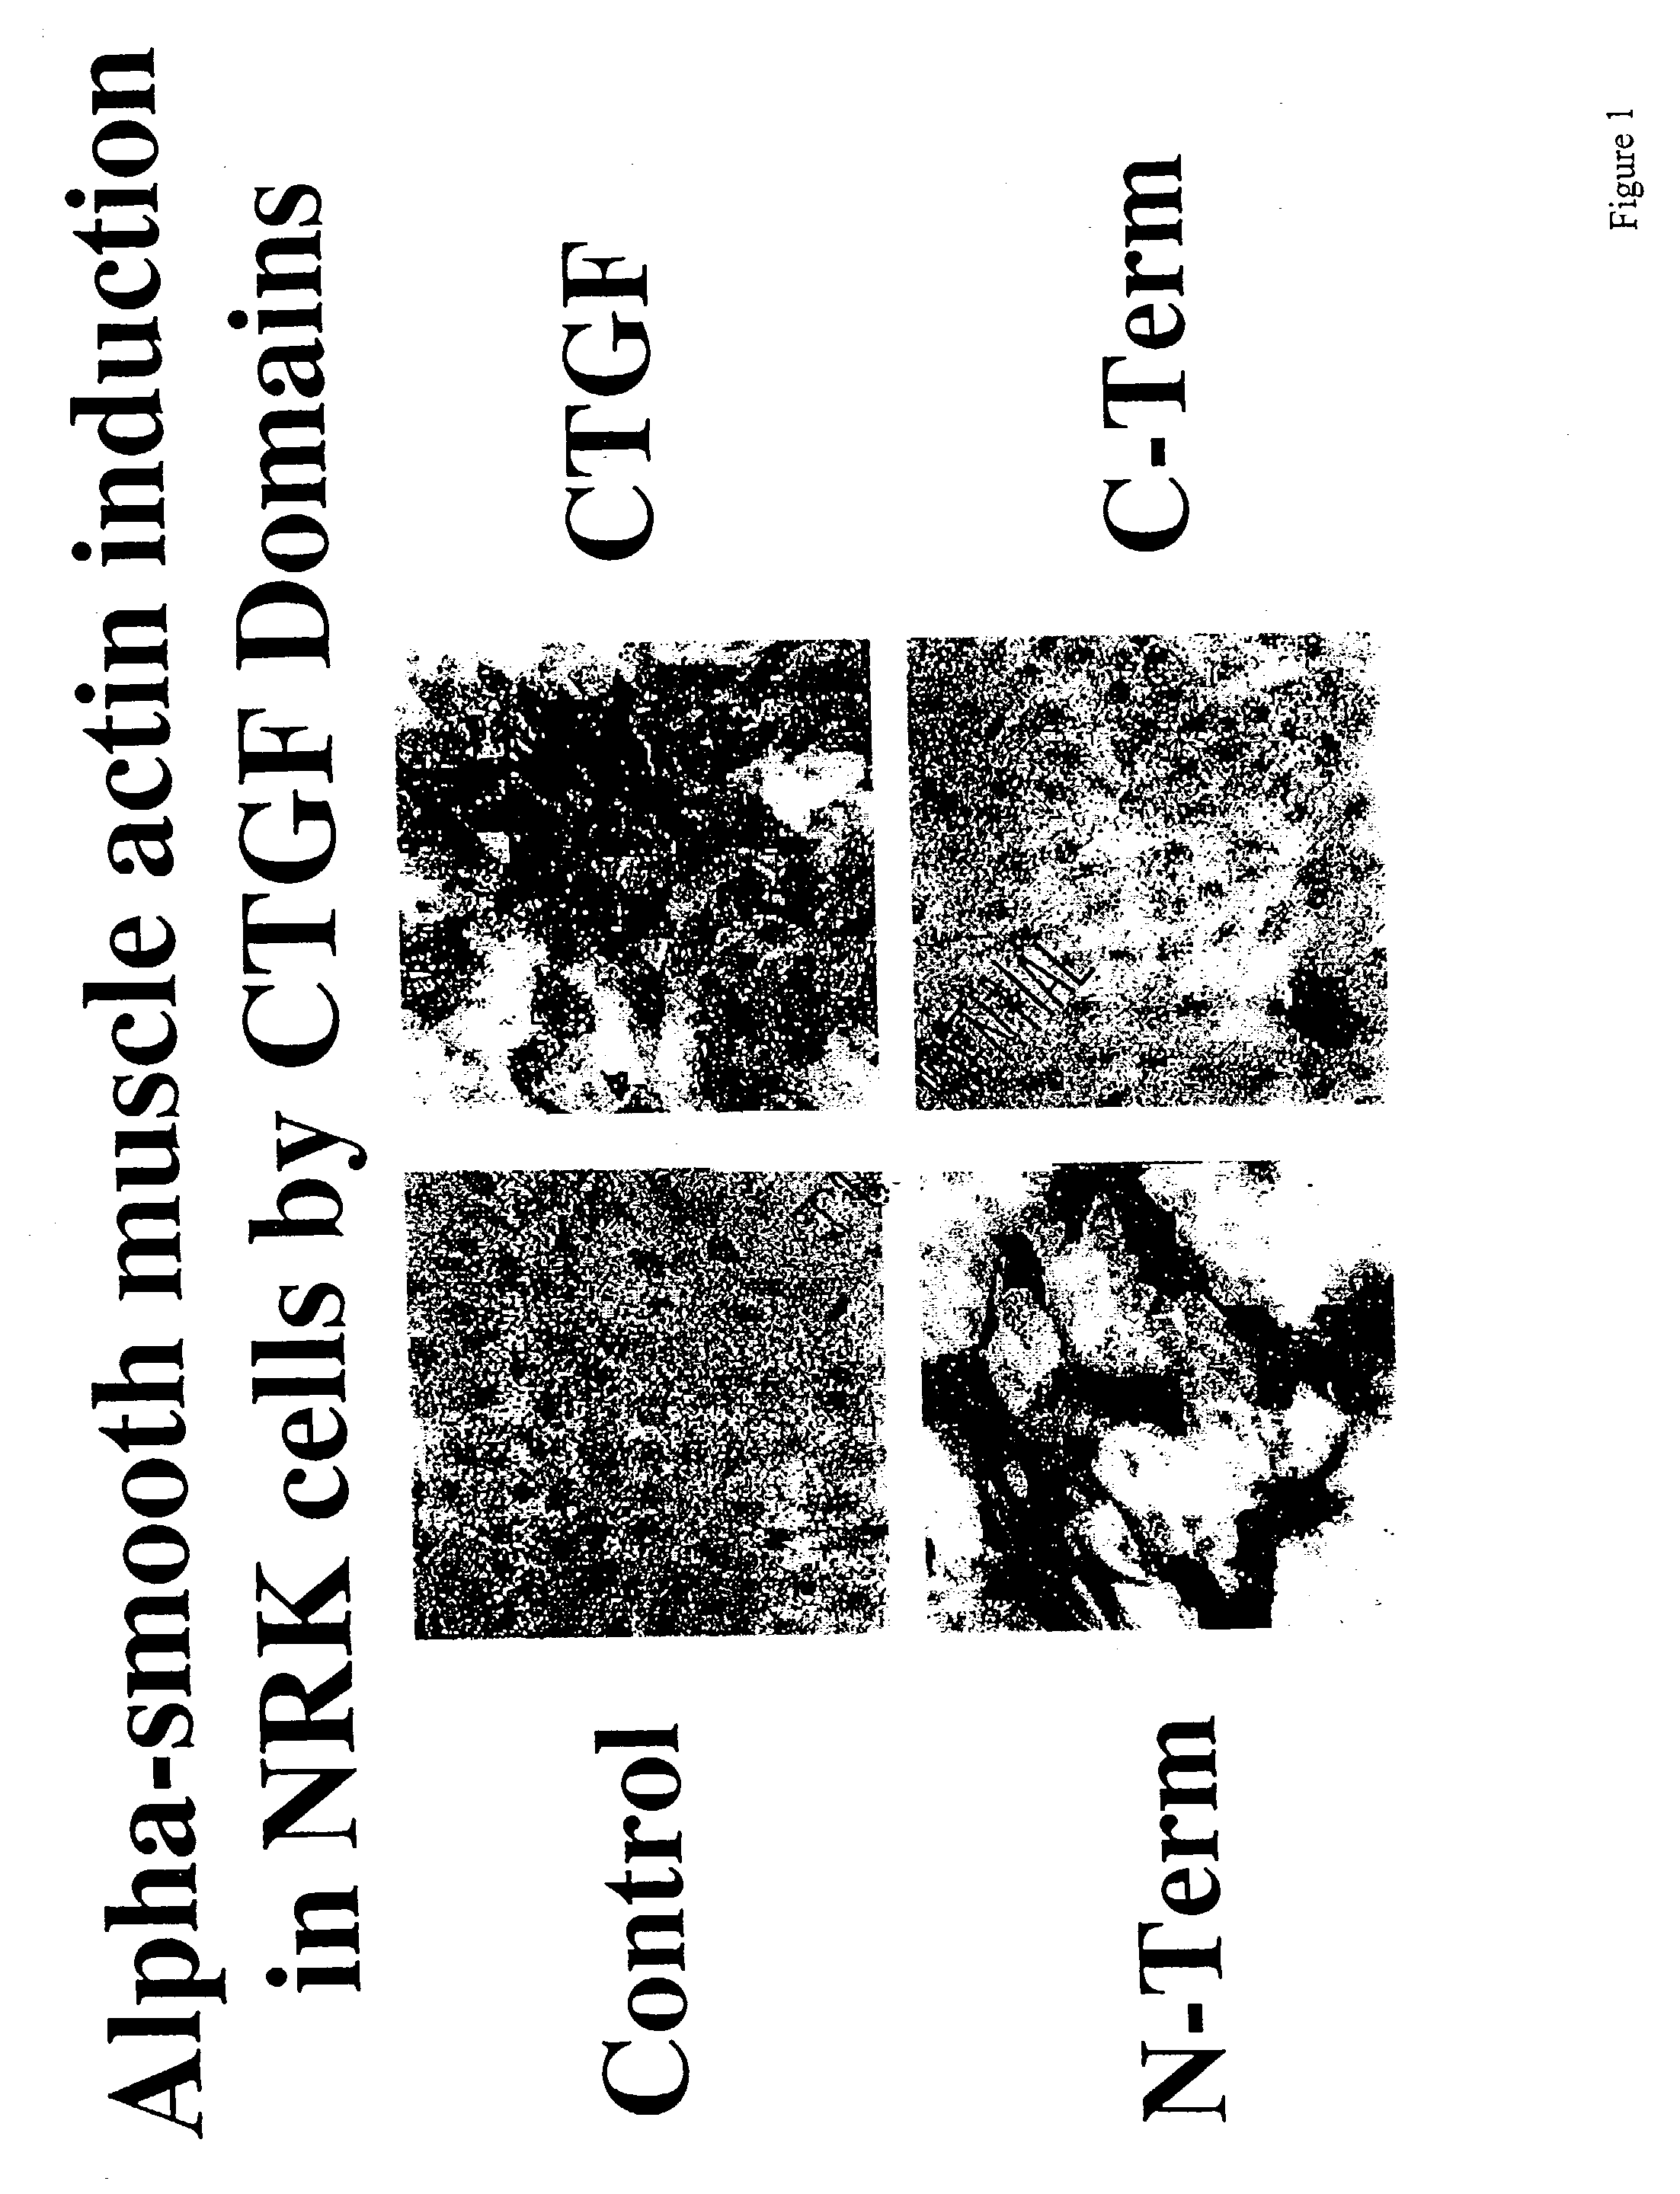 Antibodies directed to fragments of connective tissue growth factor (CTGF) polypeptide and methods and uses thereof